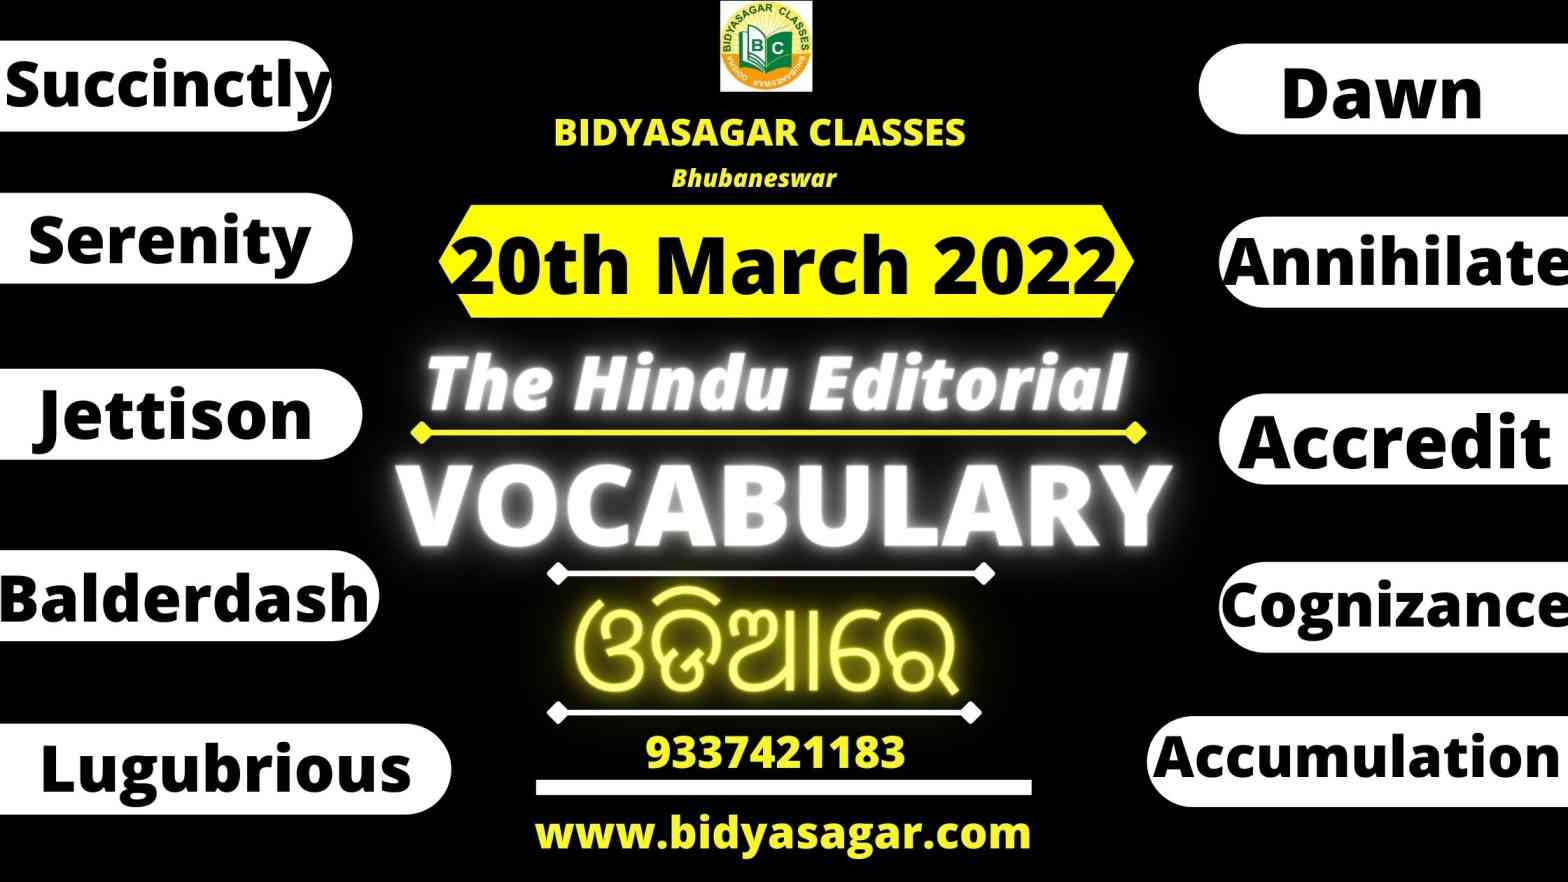 The Hindu Editorial Vocabulary of 20th March 2022